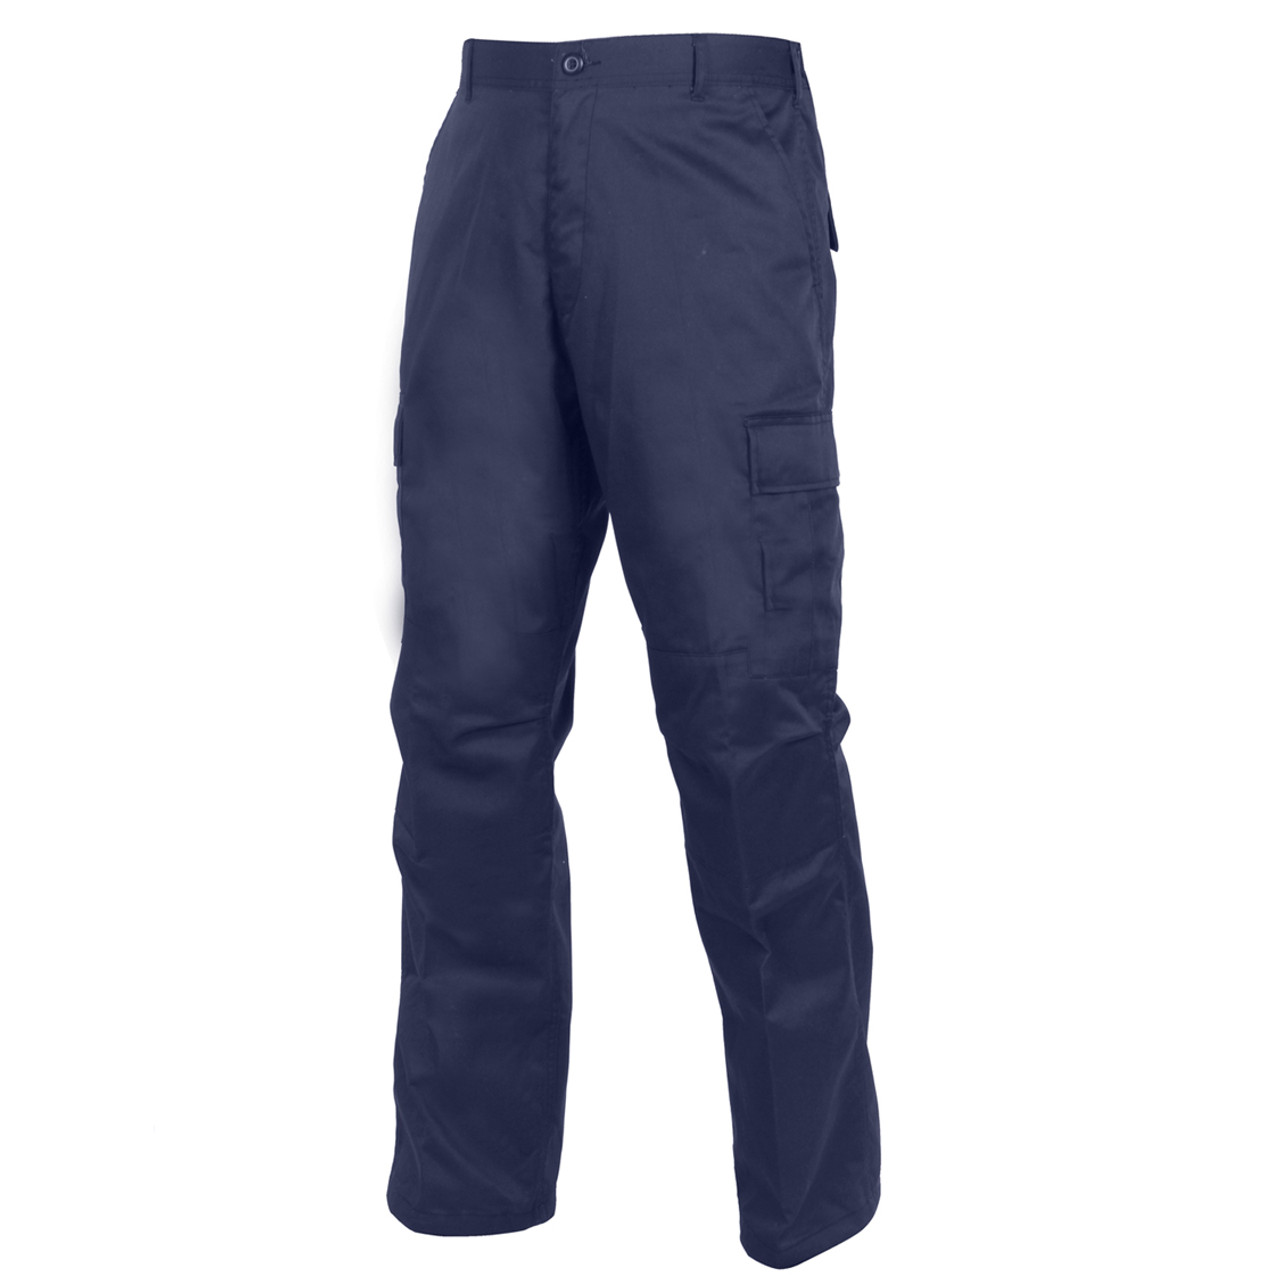 Shop Relaxed Fit Zipper Navy BDU Pants - Fatigues Army Navy